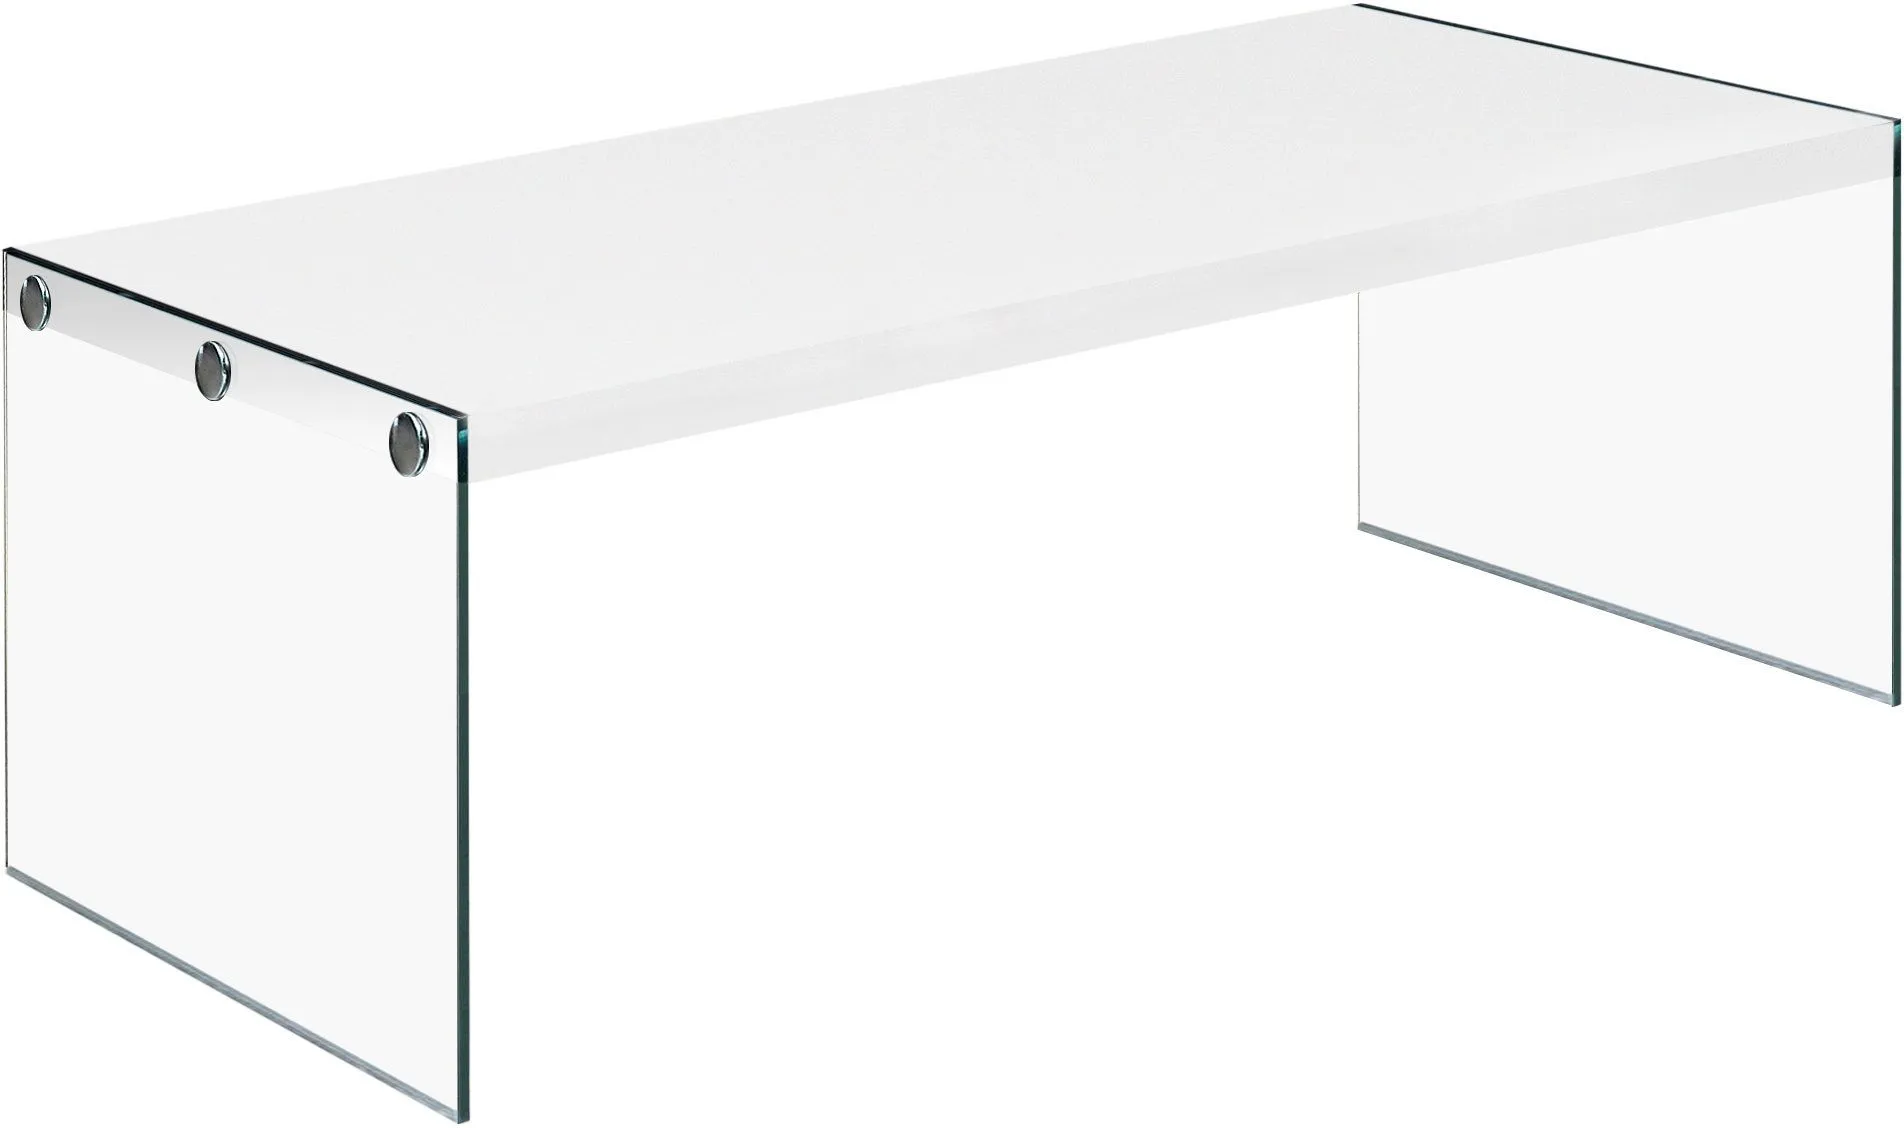 Coffee Table, Accent, Cocktail, Rectangular, Living Room, 44"L, Tempered Glass, Laminate, Glossy White, Clear, Contemporary, Modern